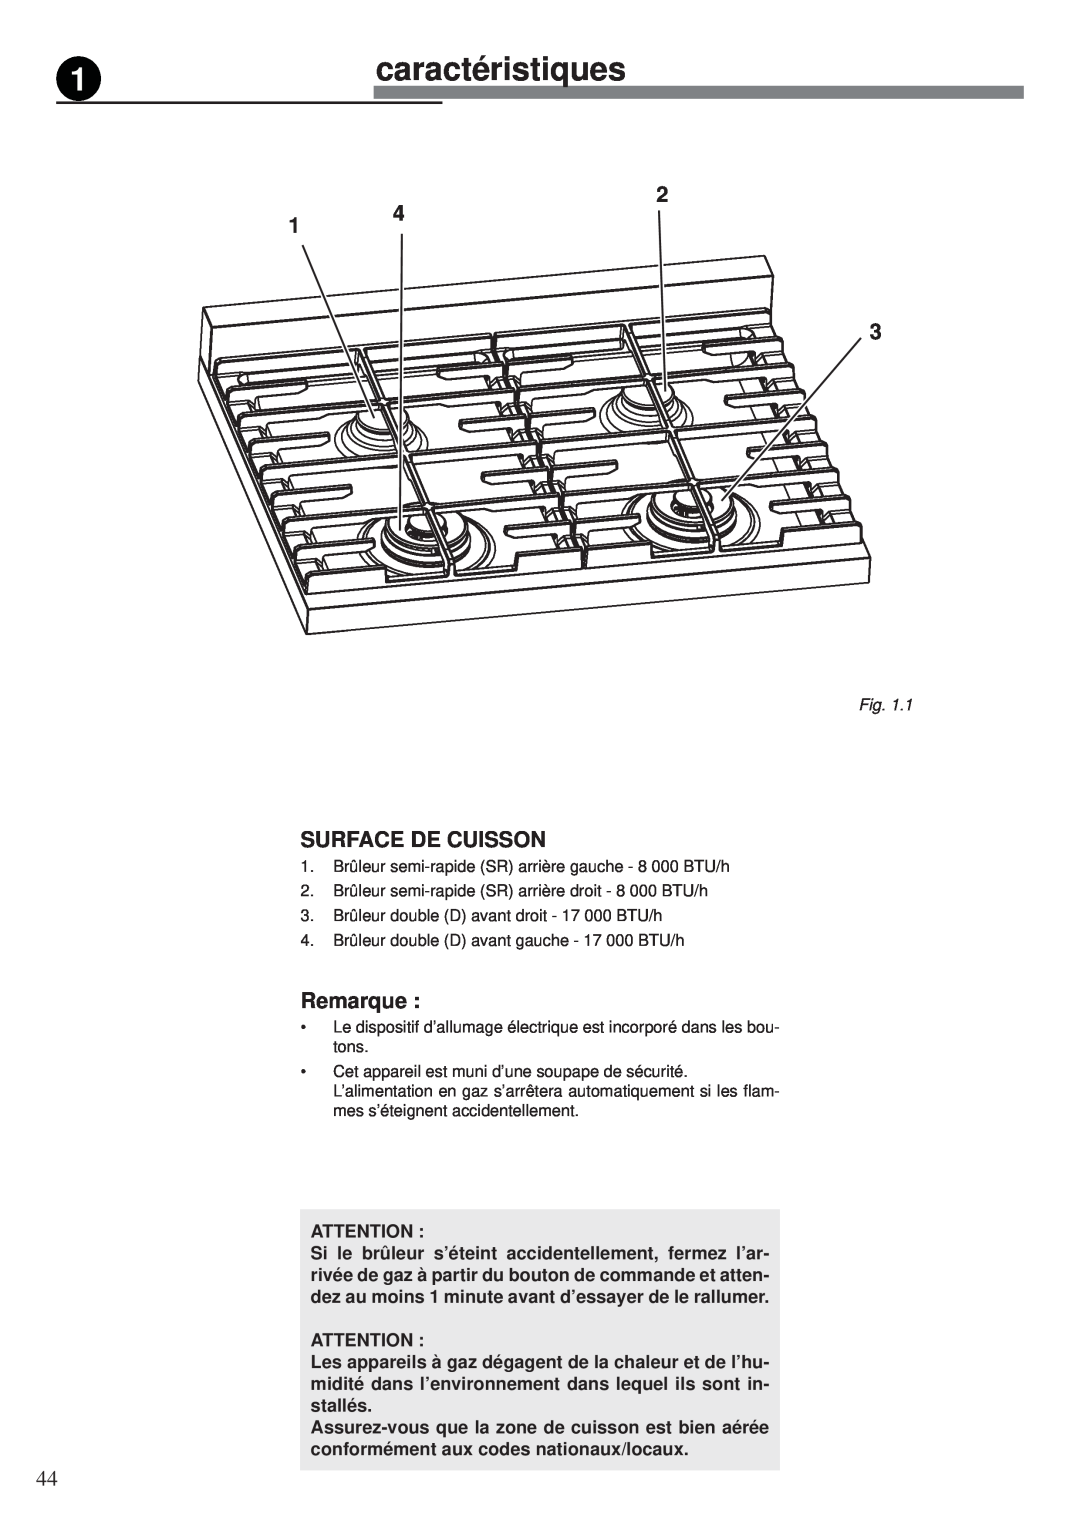 Fisher & Paykel OR30SDPWGX manual 1caractéristiques, Surface De Cuisson, Remarque 